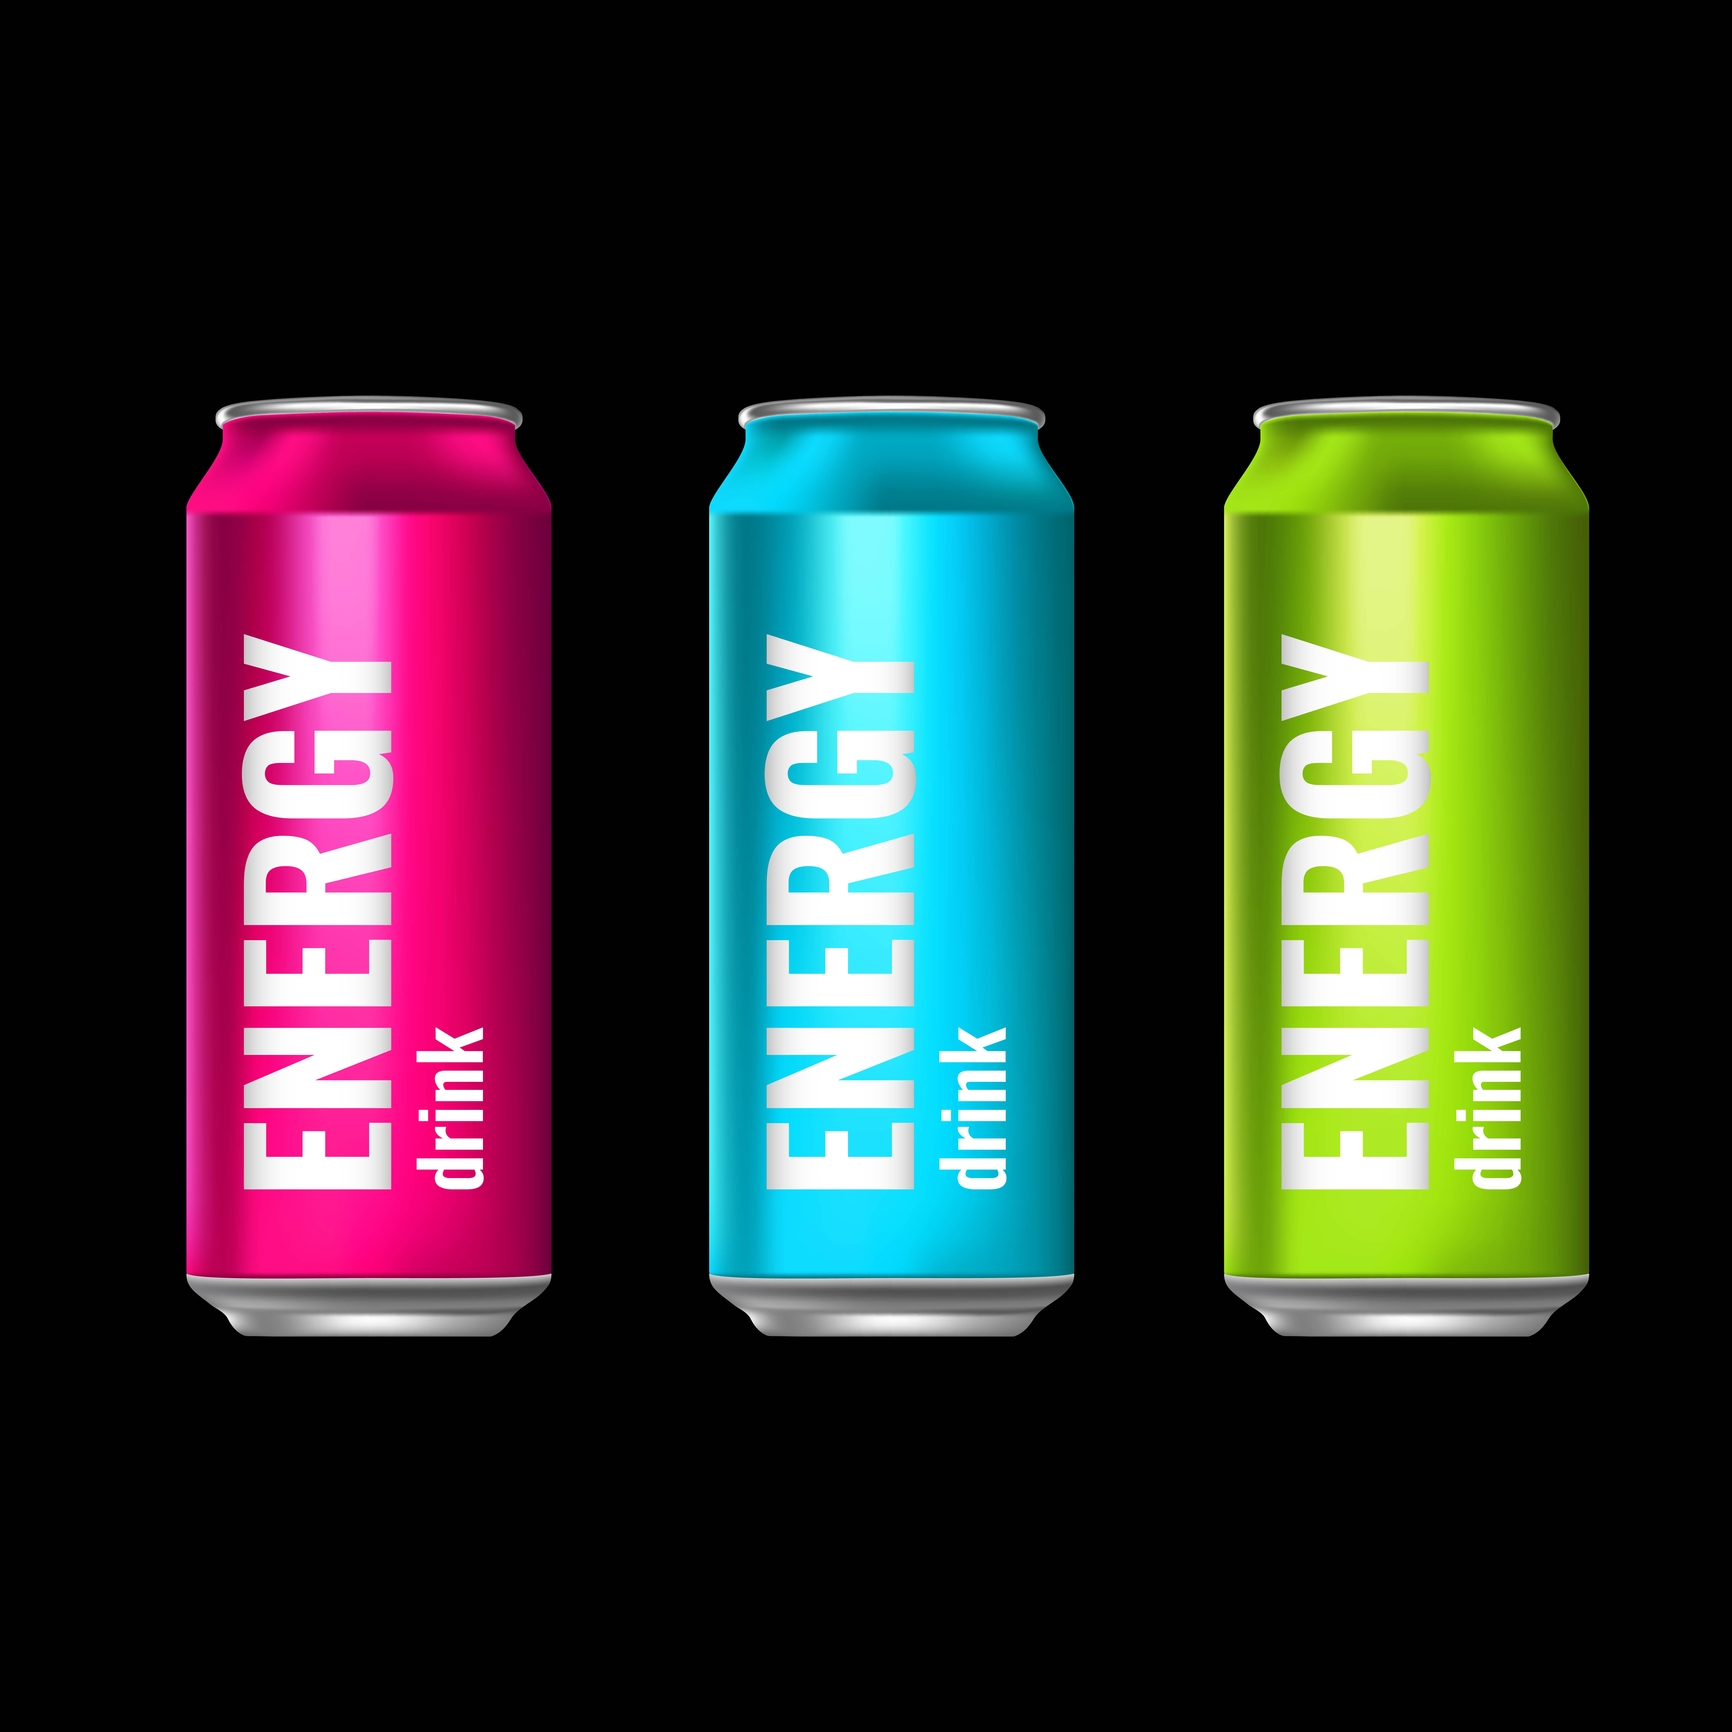 Energy drinks with natural ingredients